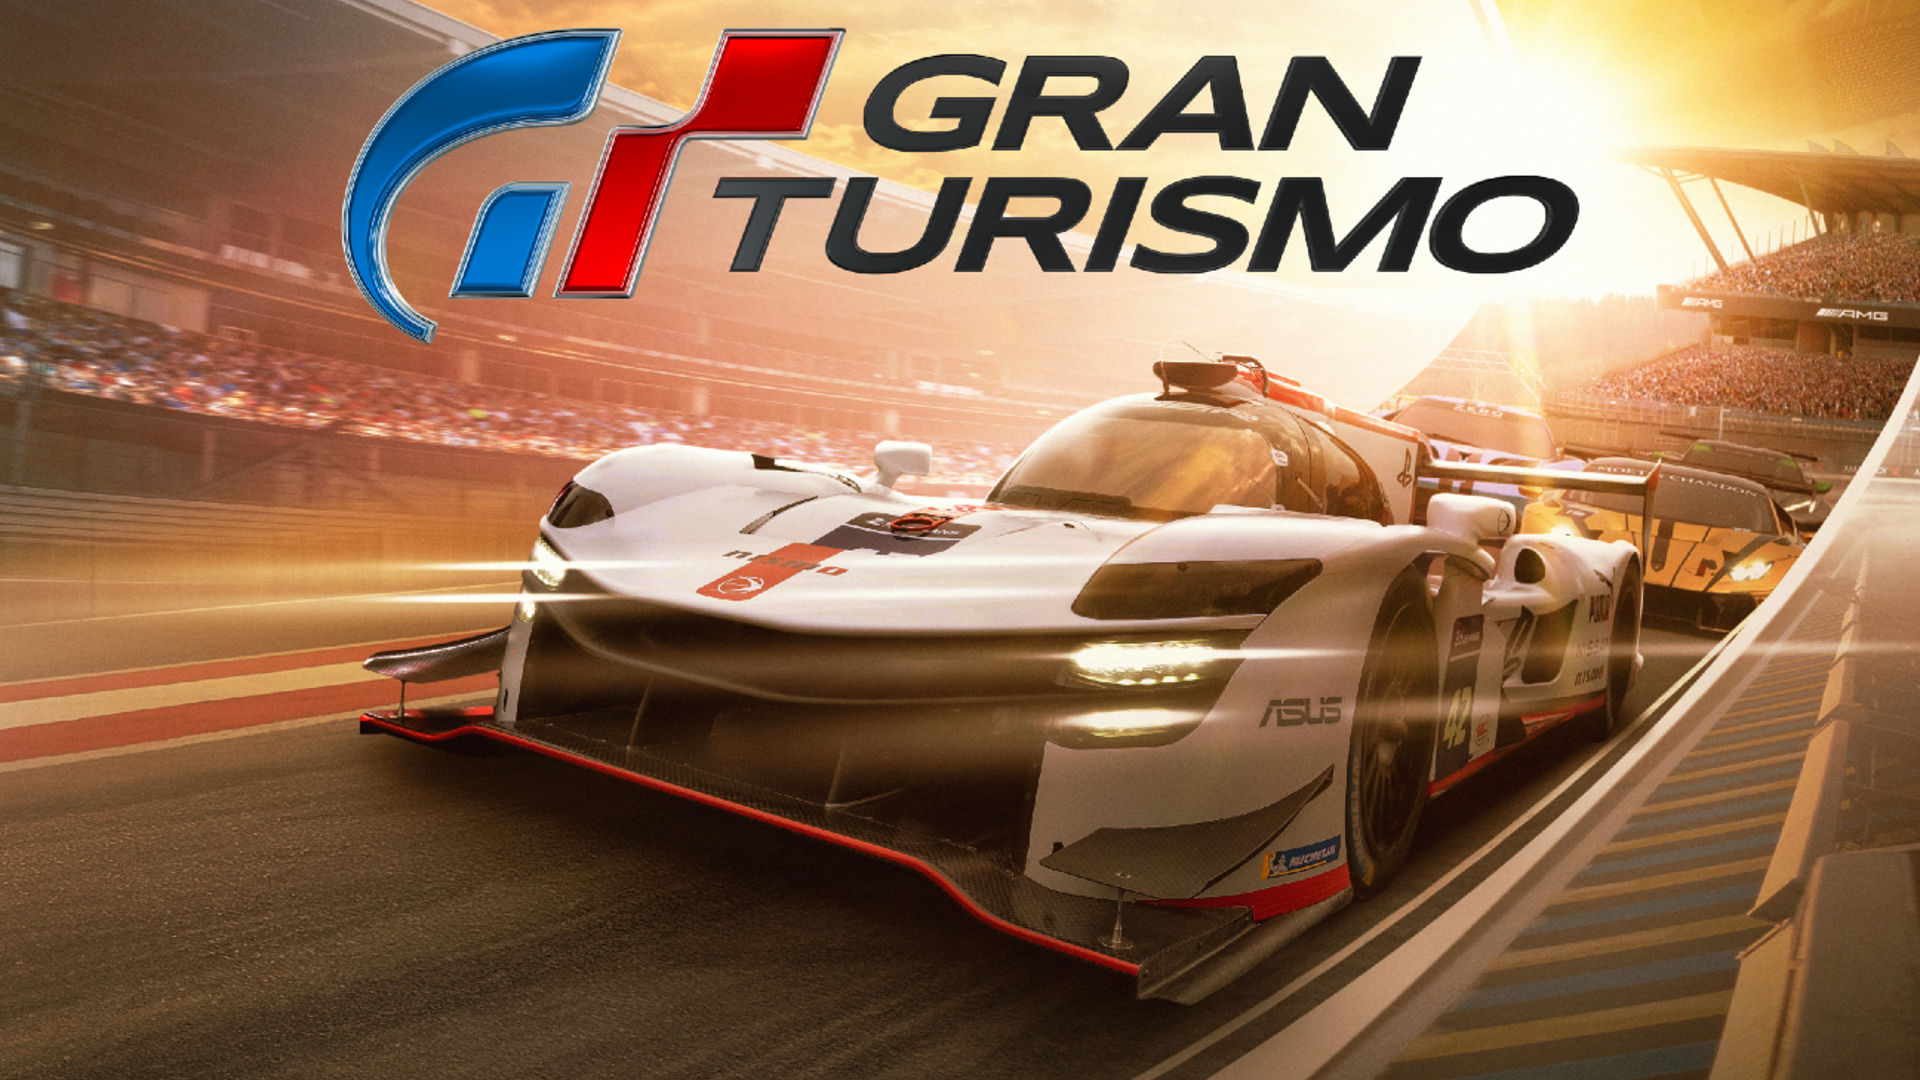 This Is When The Gran Turismo Movie Premieres In Malaysia